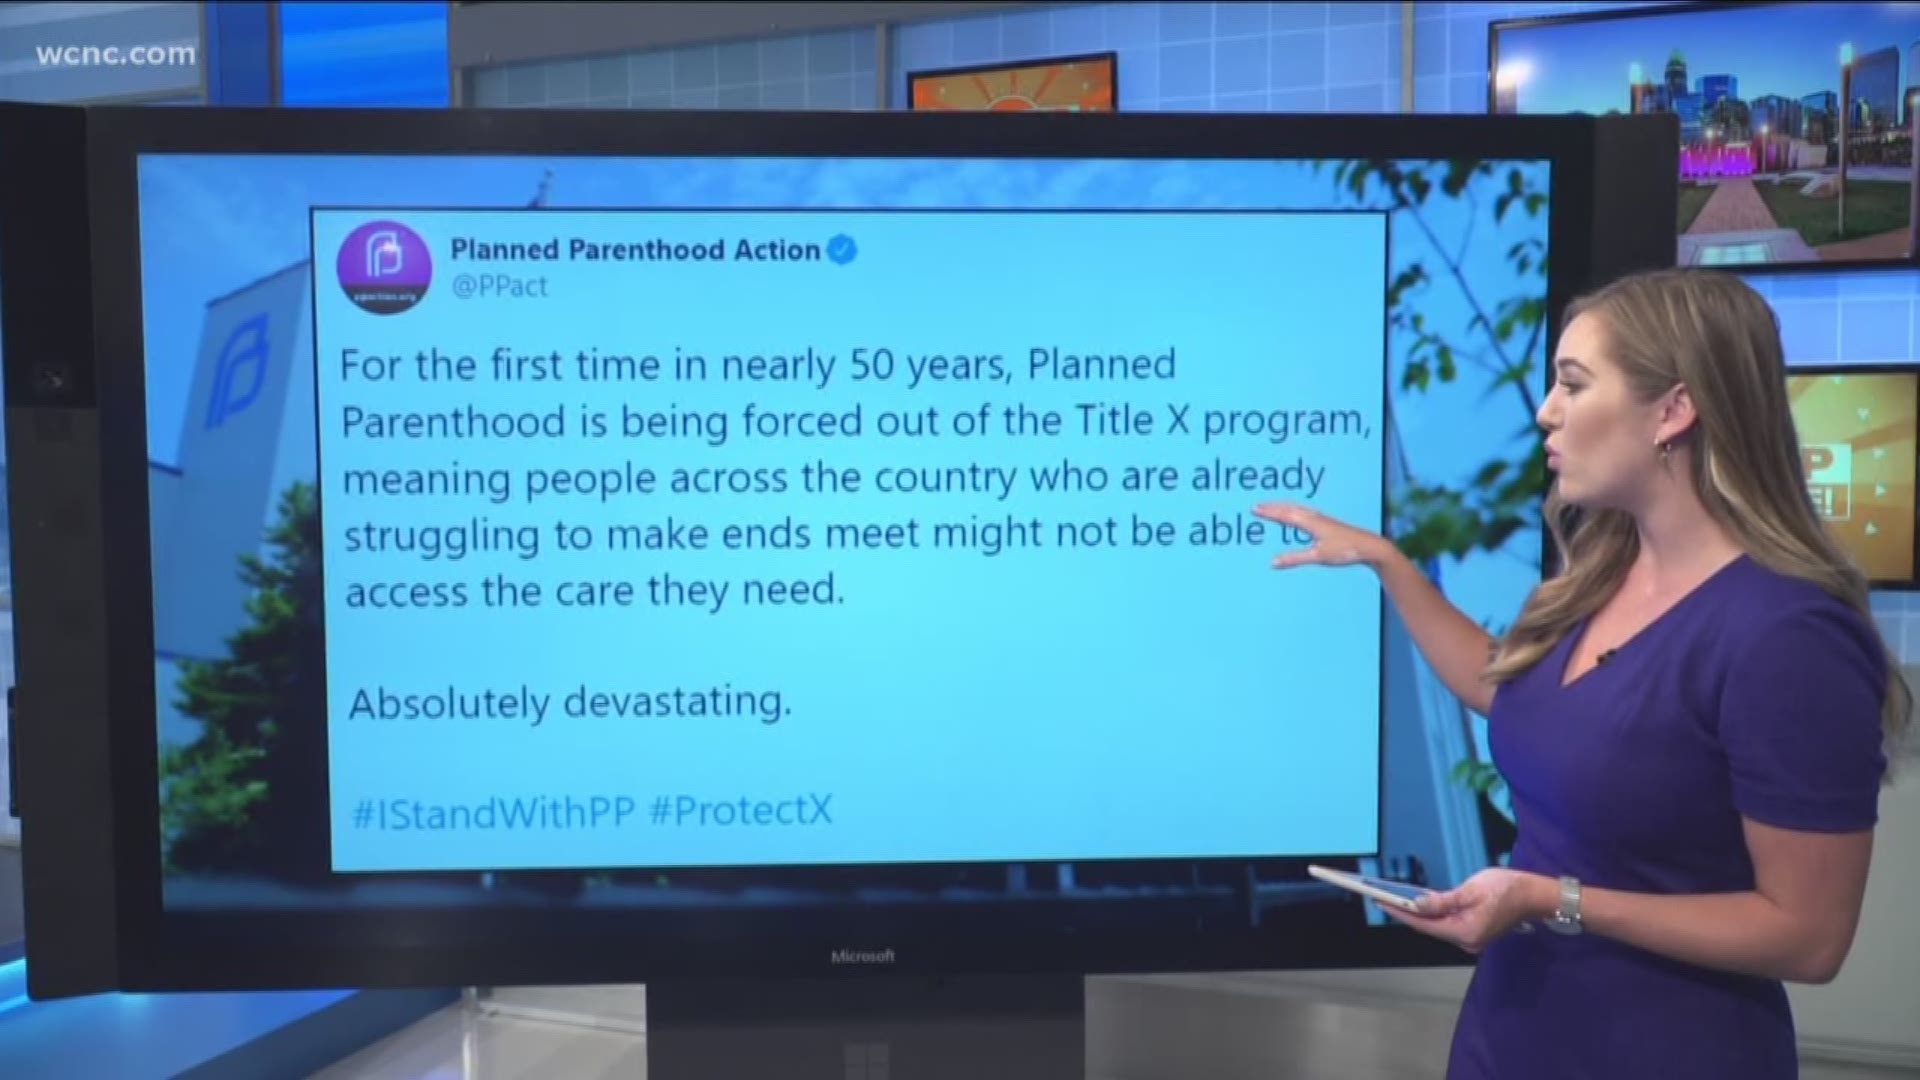 Planned Parenthood announced that they are being forced to withdraw from federal funding through Title X over a rule regarding abortion that they don't agree with.